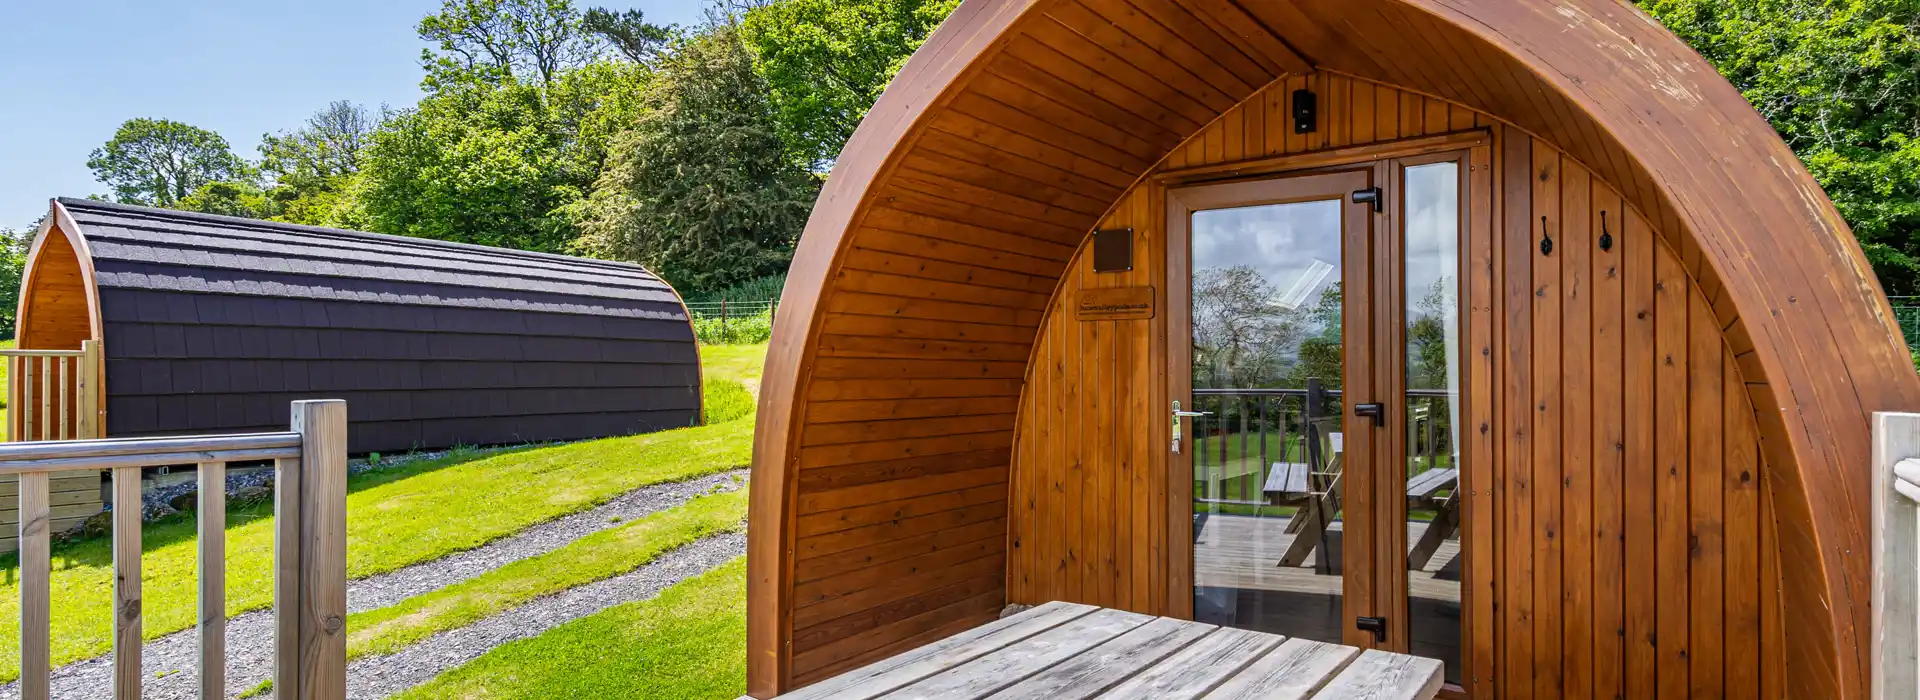 Camping and glamping pods in Cumbria and Lake District